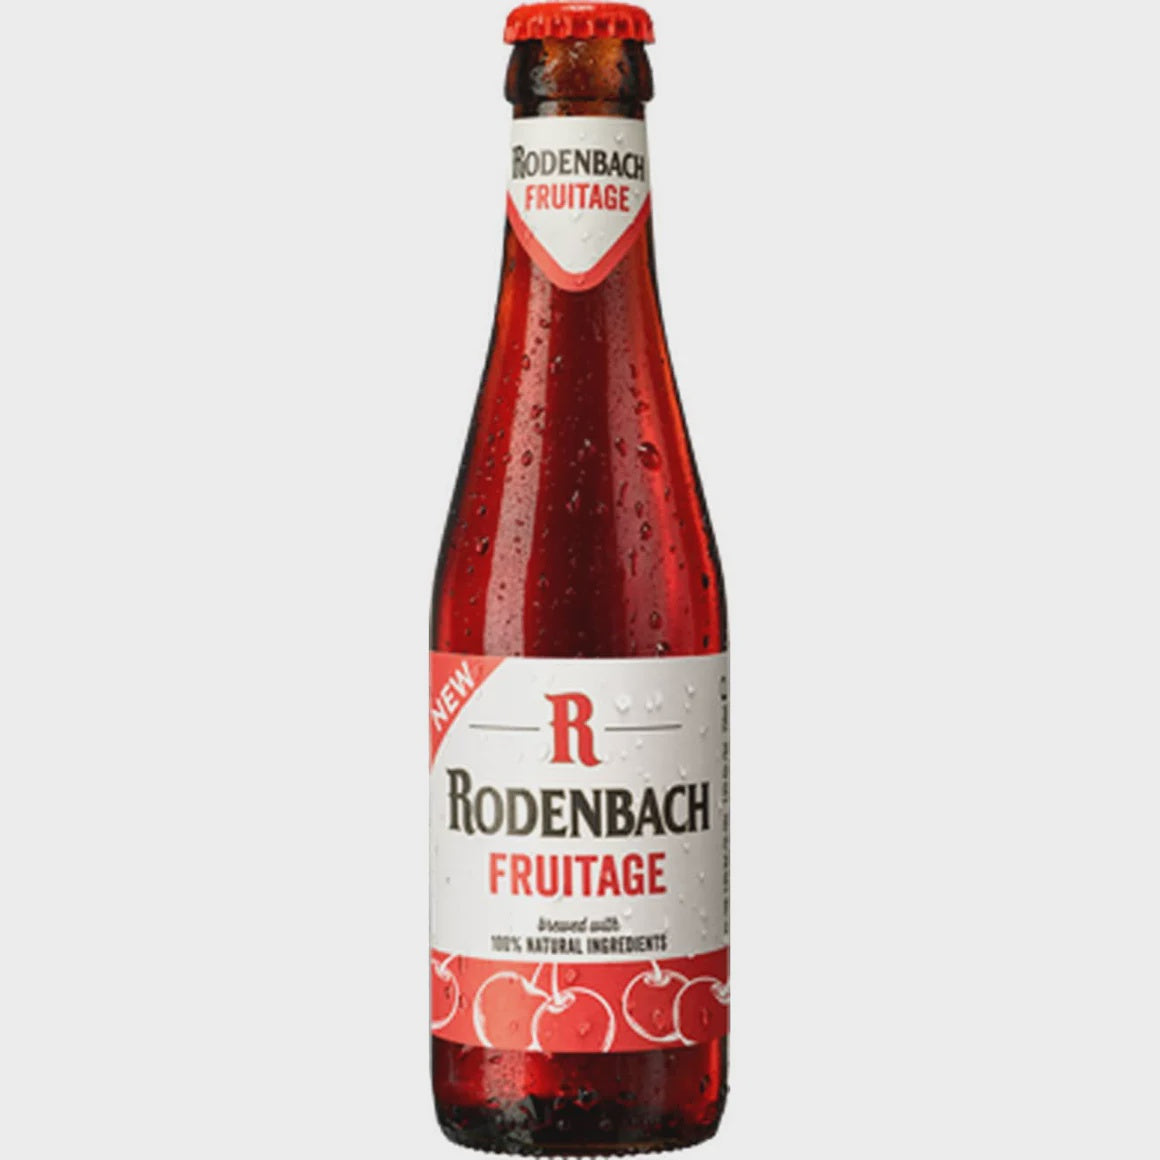 Rodenbach Fruitage 3.9% abv 25cl